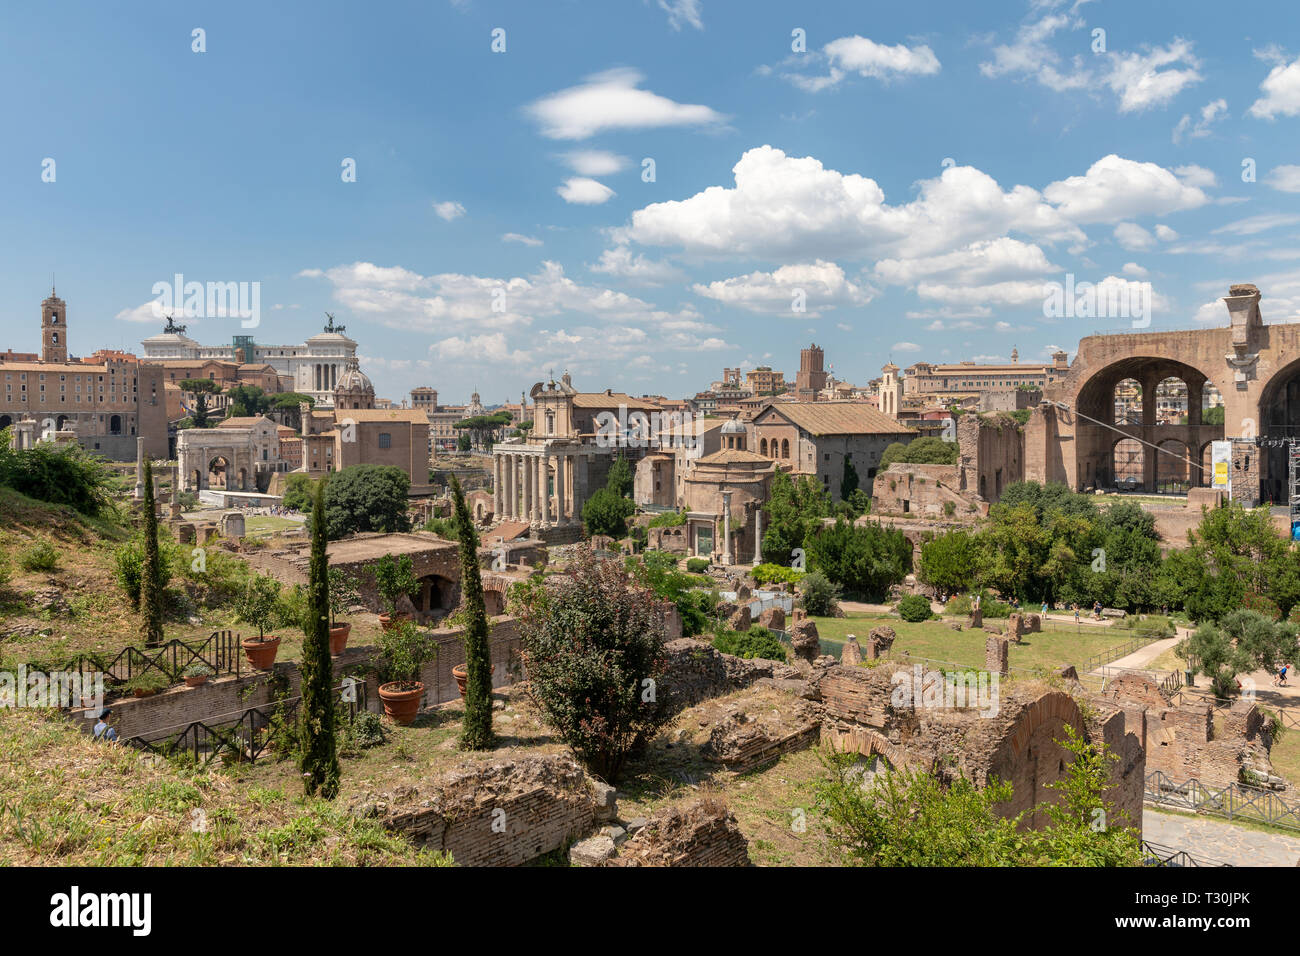 Panoramic view of Roman forum, also known by Forum Romanum or Foro Romano from Palatine Hill. It is a forum surrounded by ruins of ancient government  Stock Photo